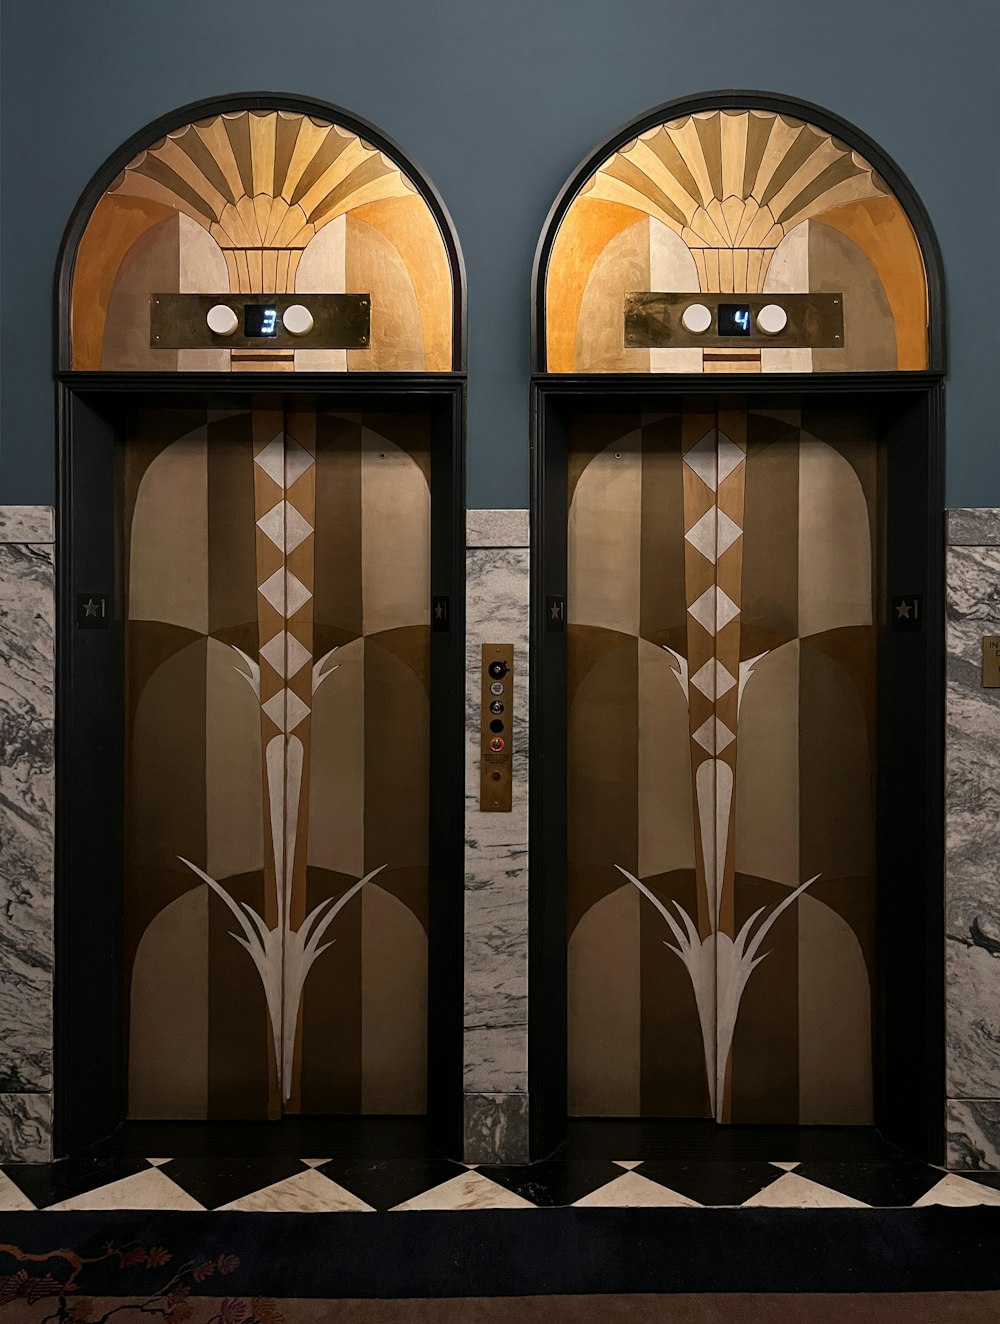 a group of doors with designs on them